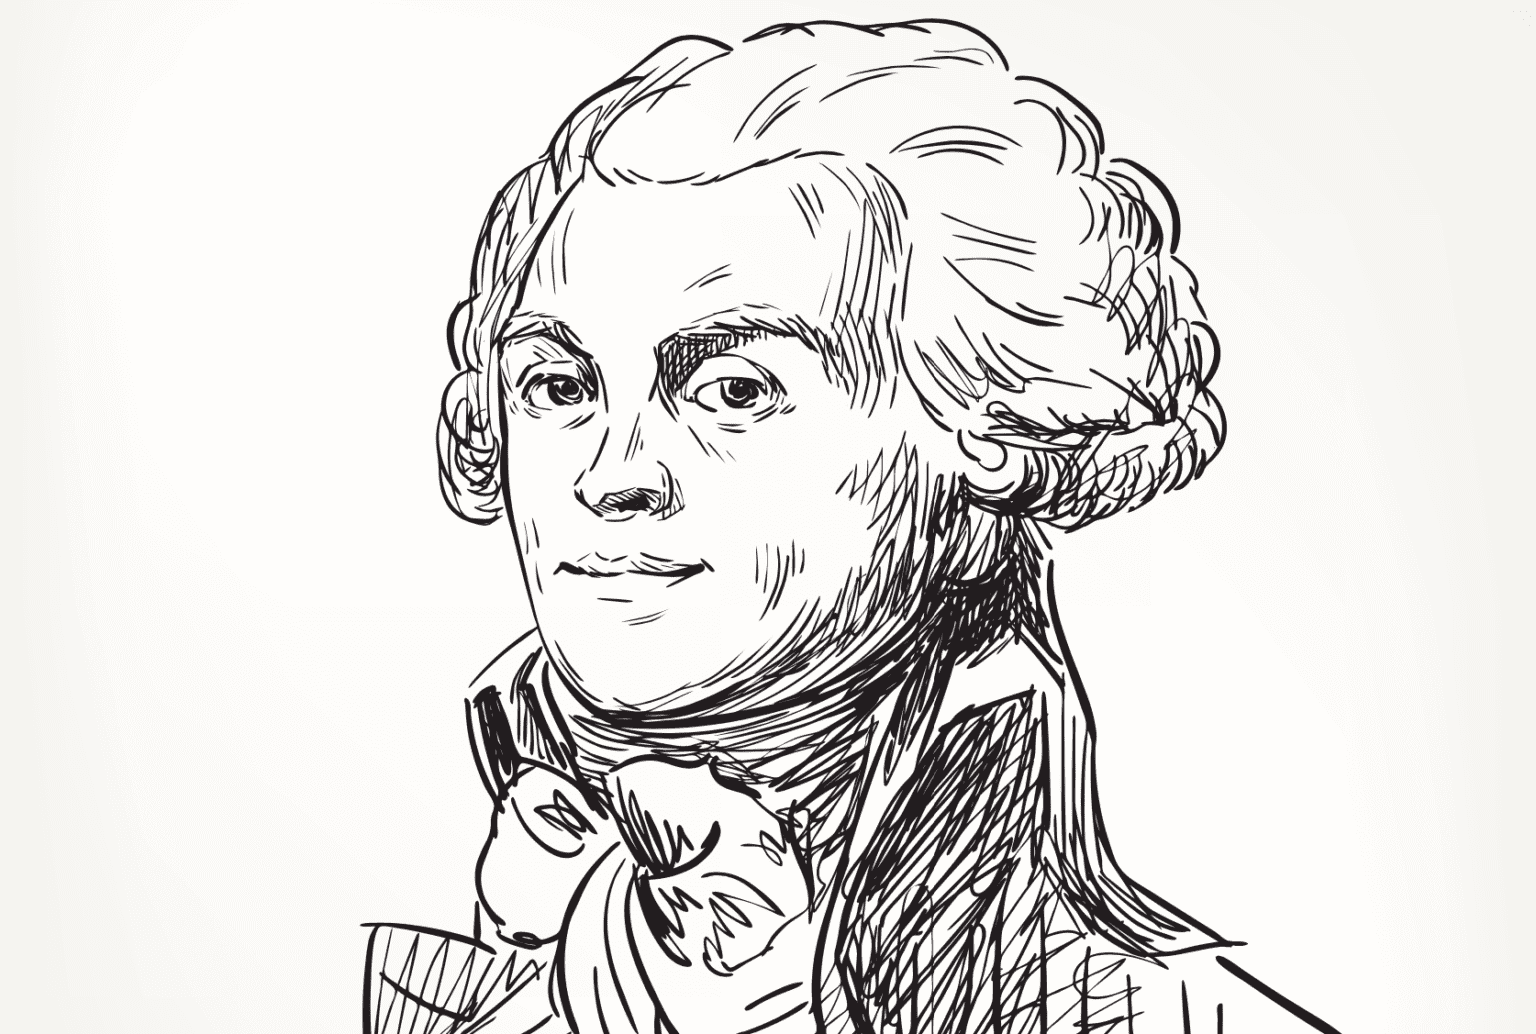 Robespierre and ‘The Radically Evil’ Revolution